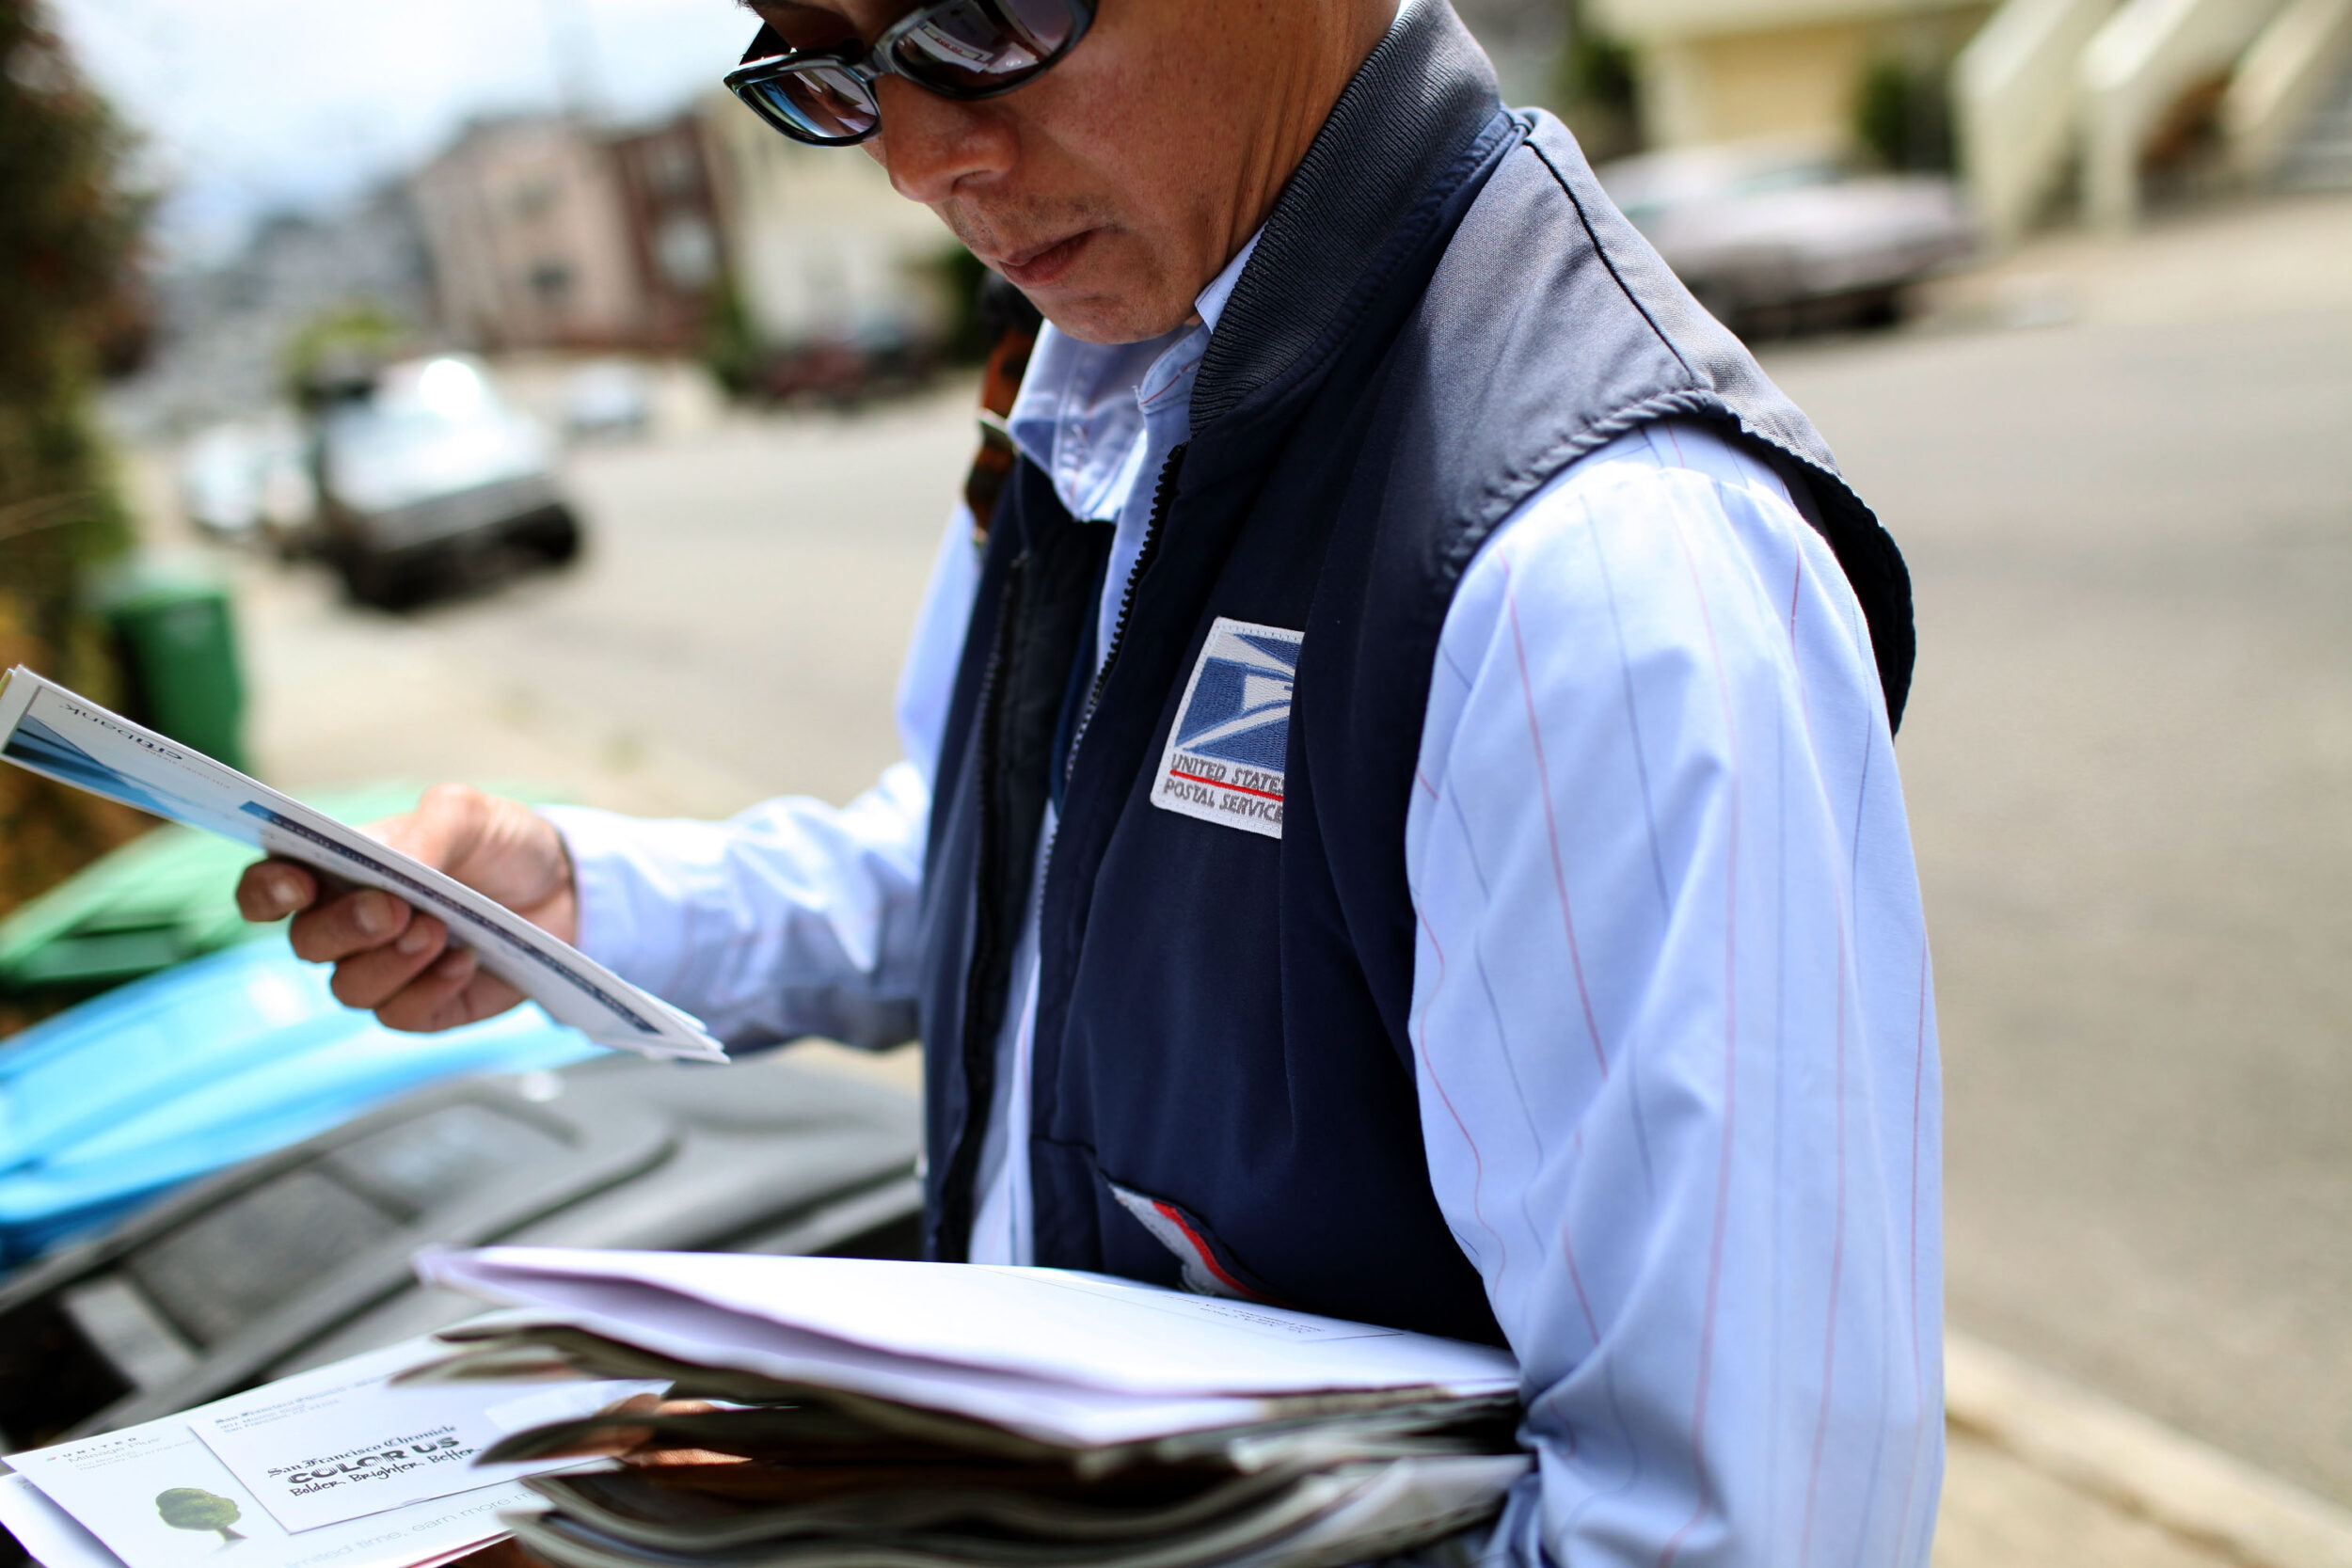 A postal worker is sorting mail on a street, wearing sunglasses and a vest.